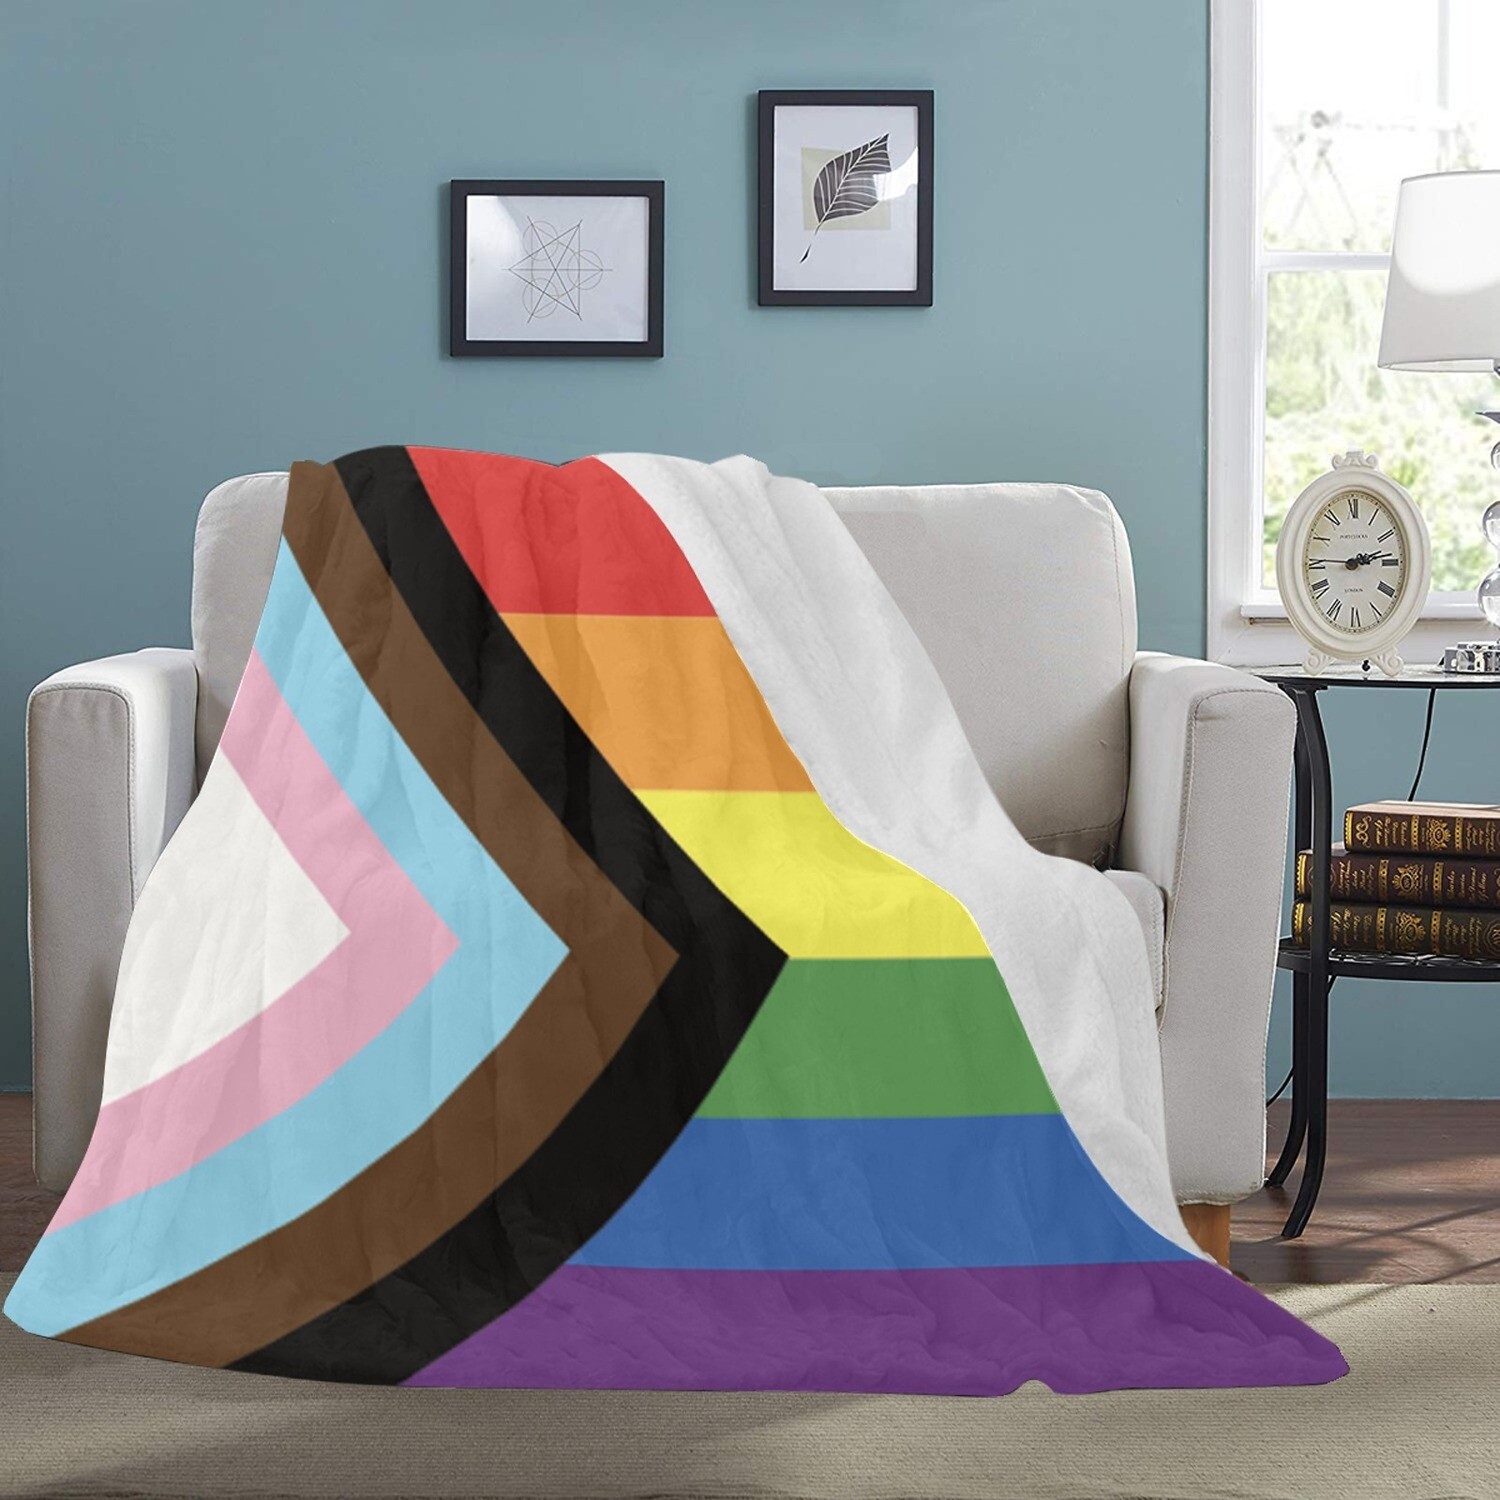 🤴🏽👸🏽🏳️‍🌈 Large Ultra-Soft Micro Fleece Blanket Love is Love Progress pride flag, LGBTQ flag Rebooted by Daniel Quasar, rainbow flag, gift, gift for her, gift for him, gift for them, 70"x80"